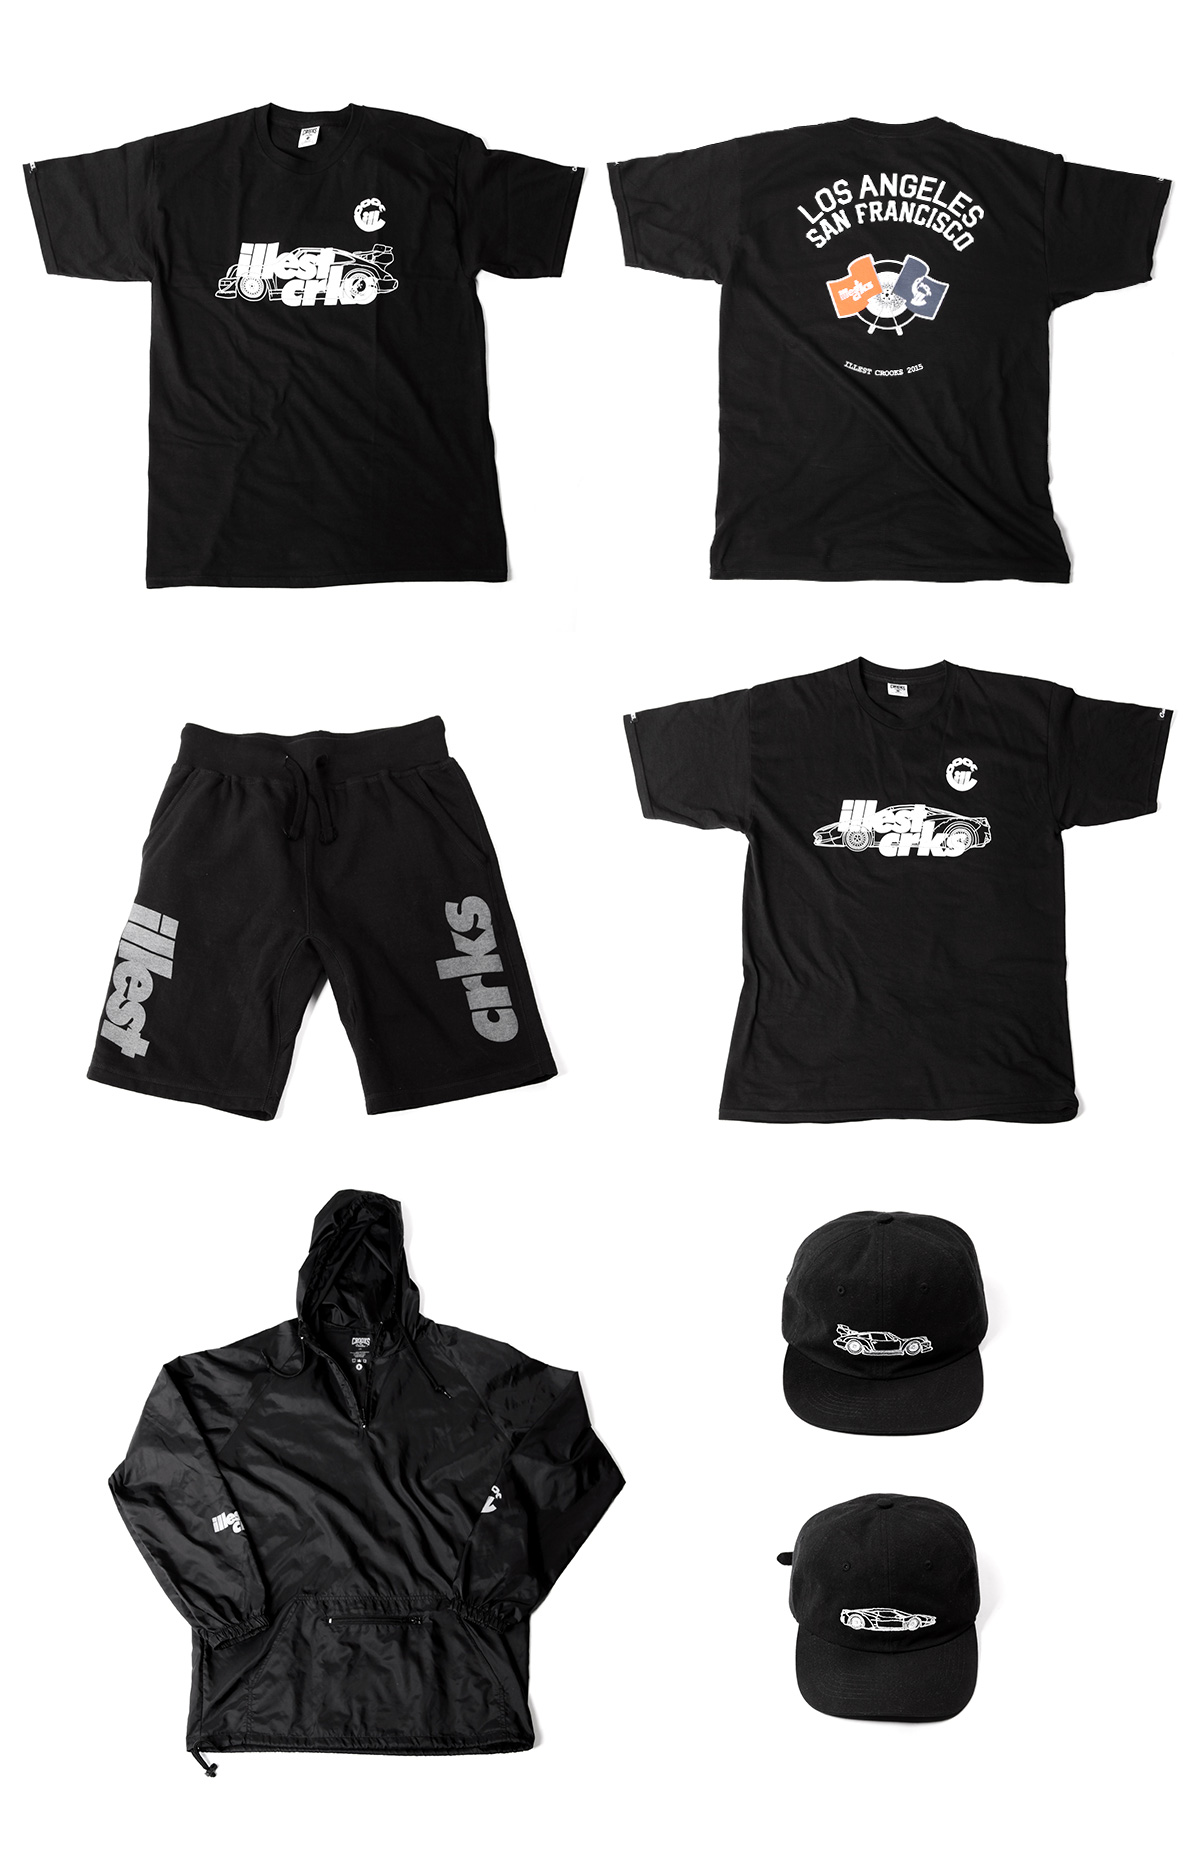 ILLEST CRKS Lineup: graphic tees, anorak, caps, and shorts 